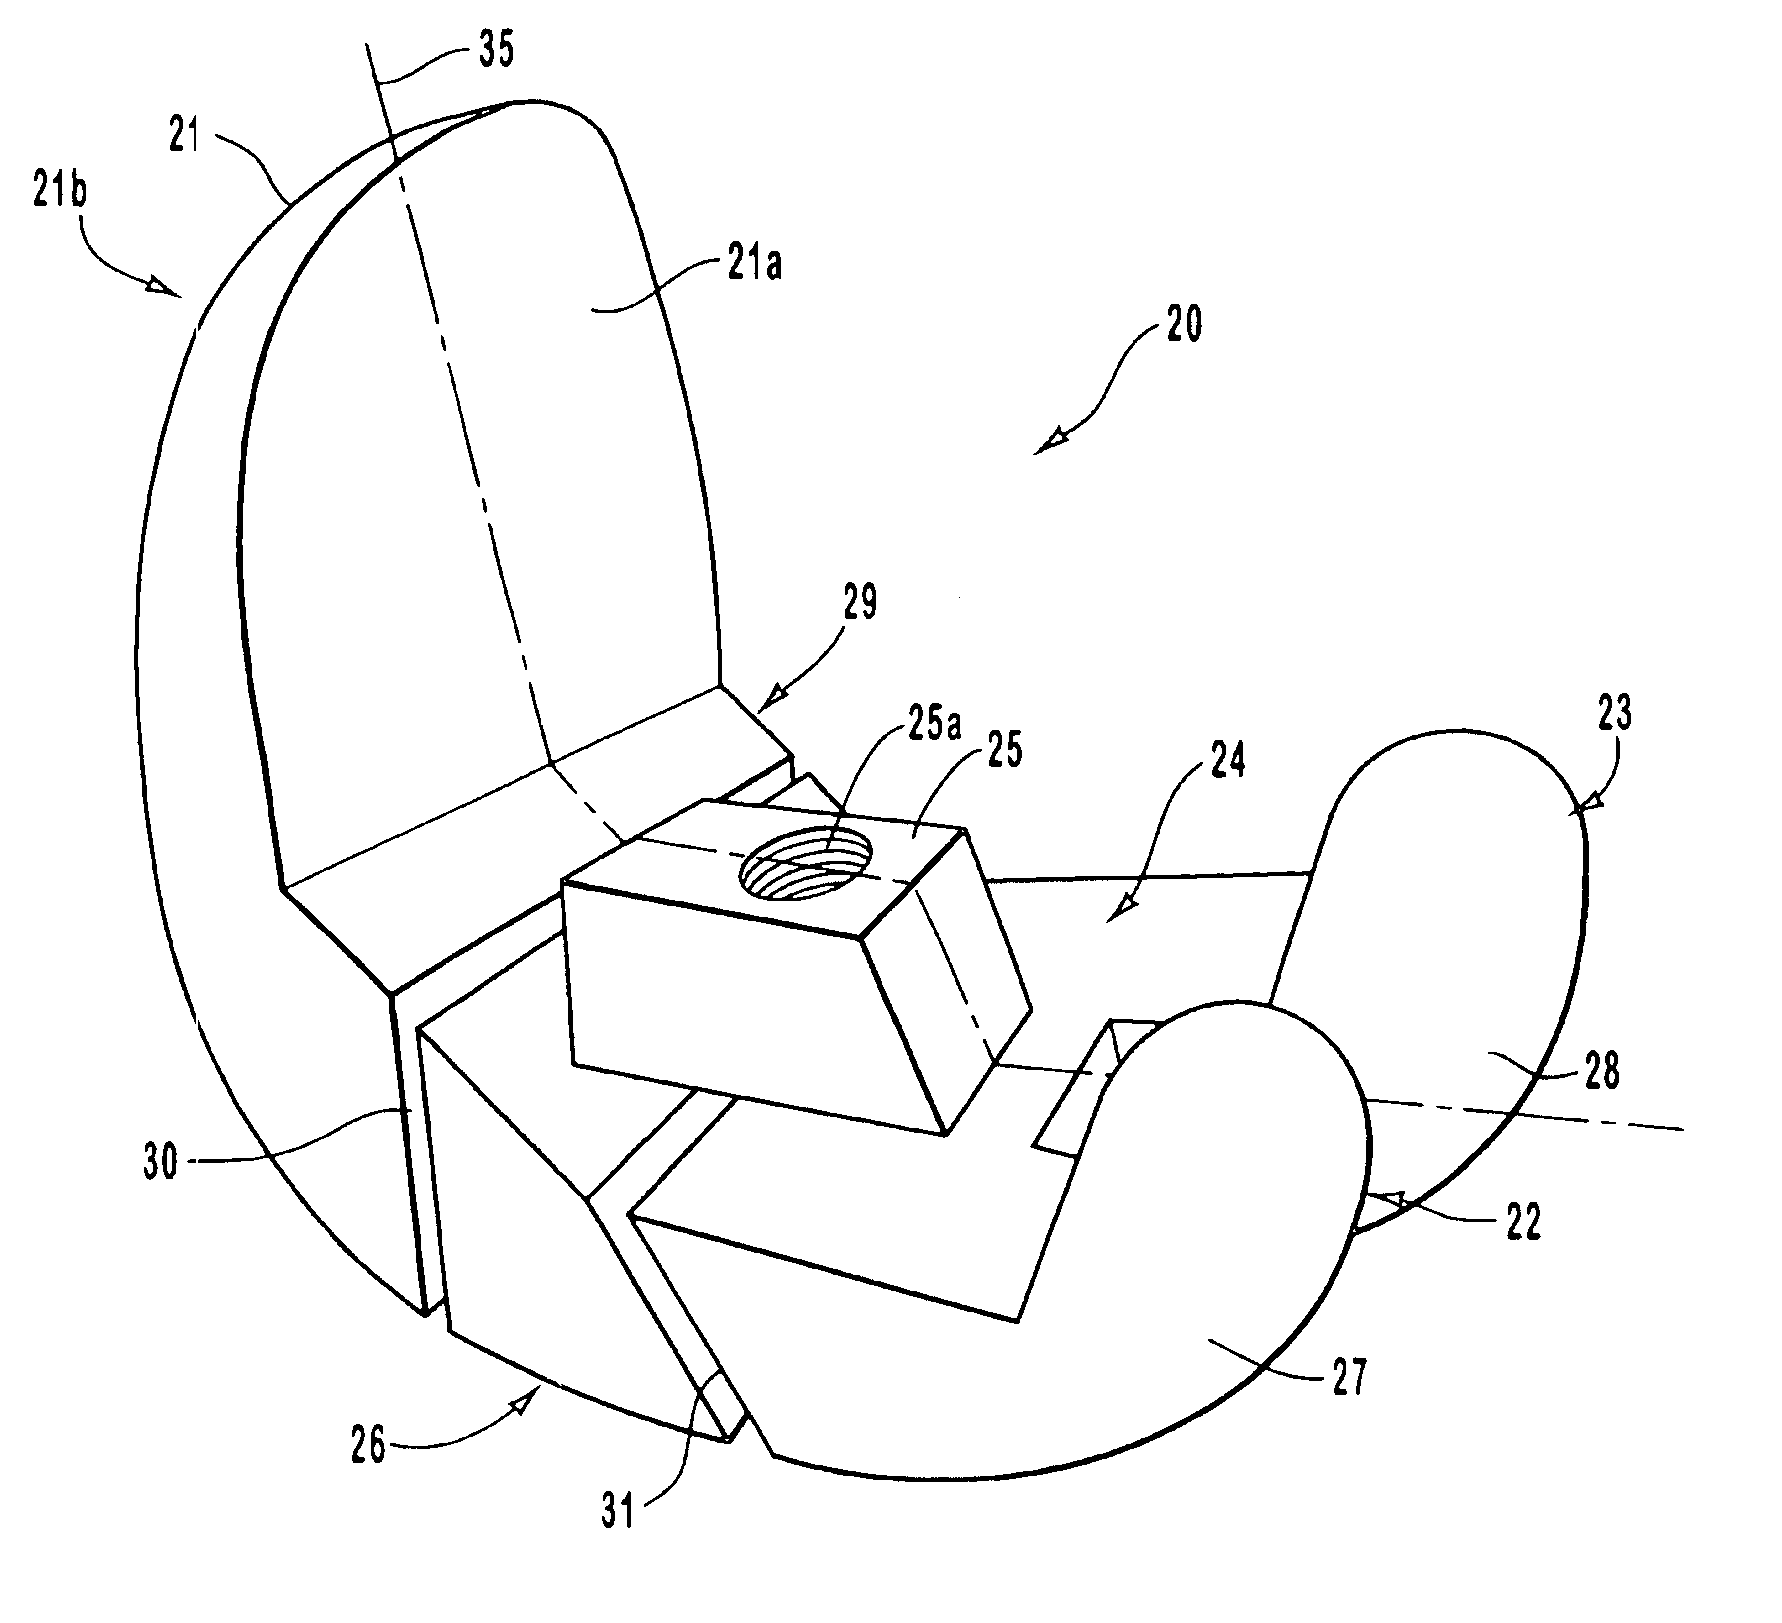 Method for resecting the knee using a resection guide and provisional prosthetic component